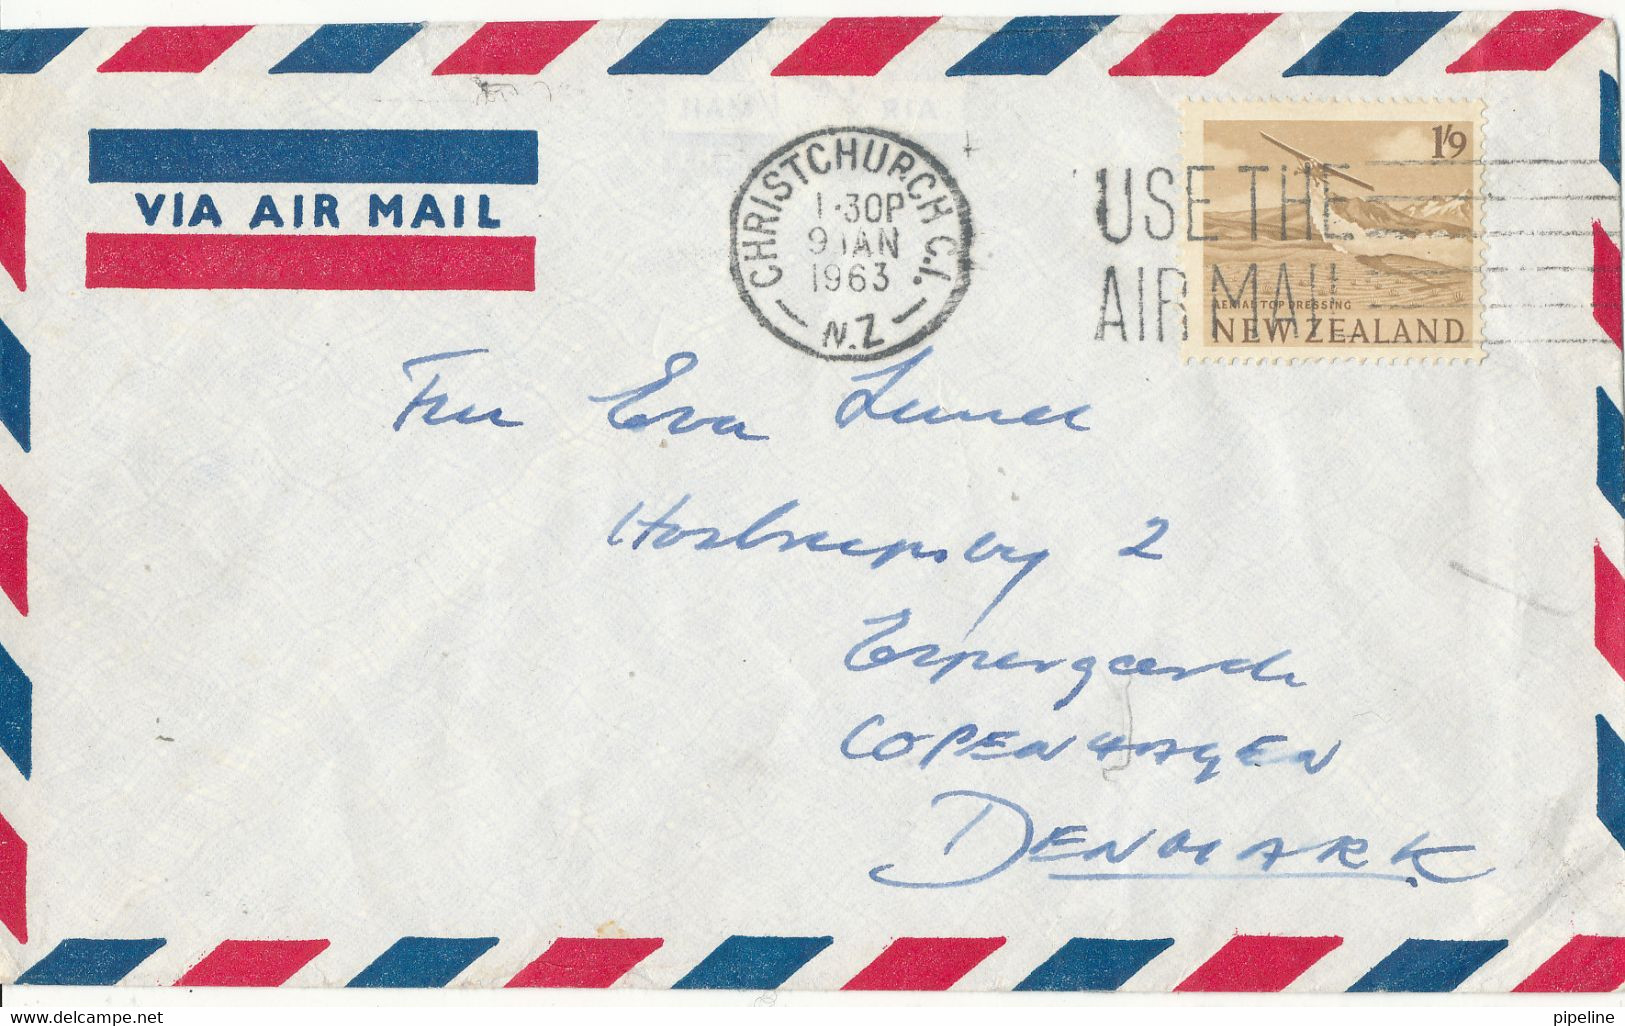 New Zealand Air Mail Cover Sent To Denmark Christchurch 9-1-1963 - Airmail